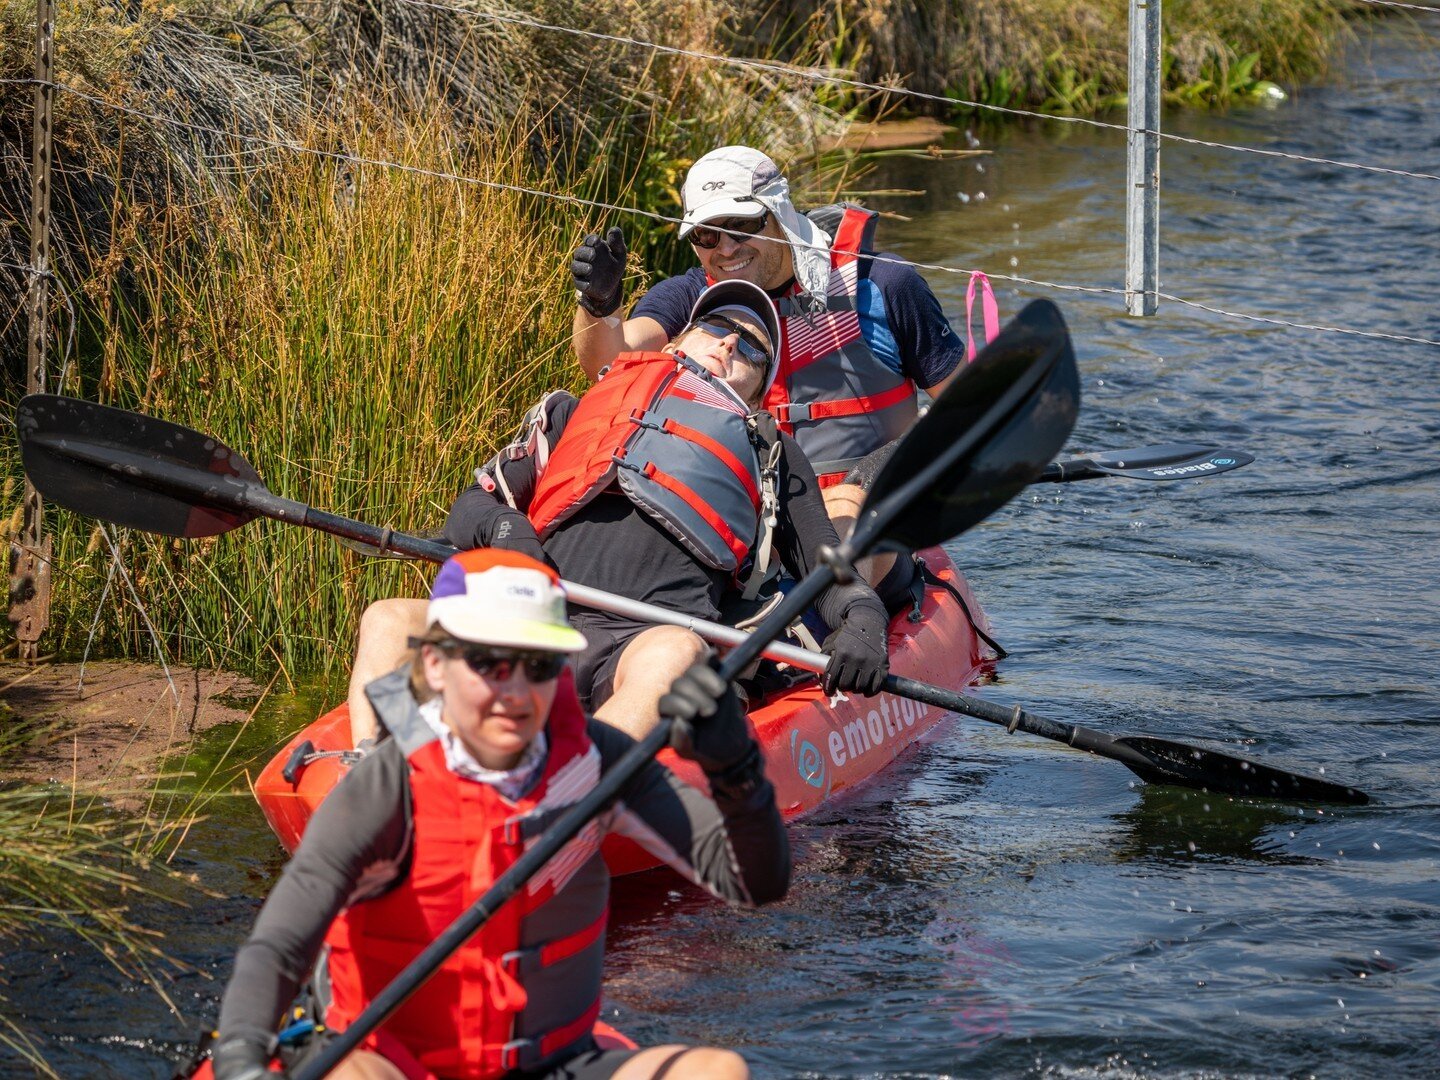 Relive the 2022 #USARA National Championships through the photos on our SmugMug page! #NationalChampionship #weARtogether⁠
#linkinbio⁠
@allouteventsca @goldrushadventureracing⁠